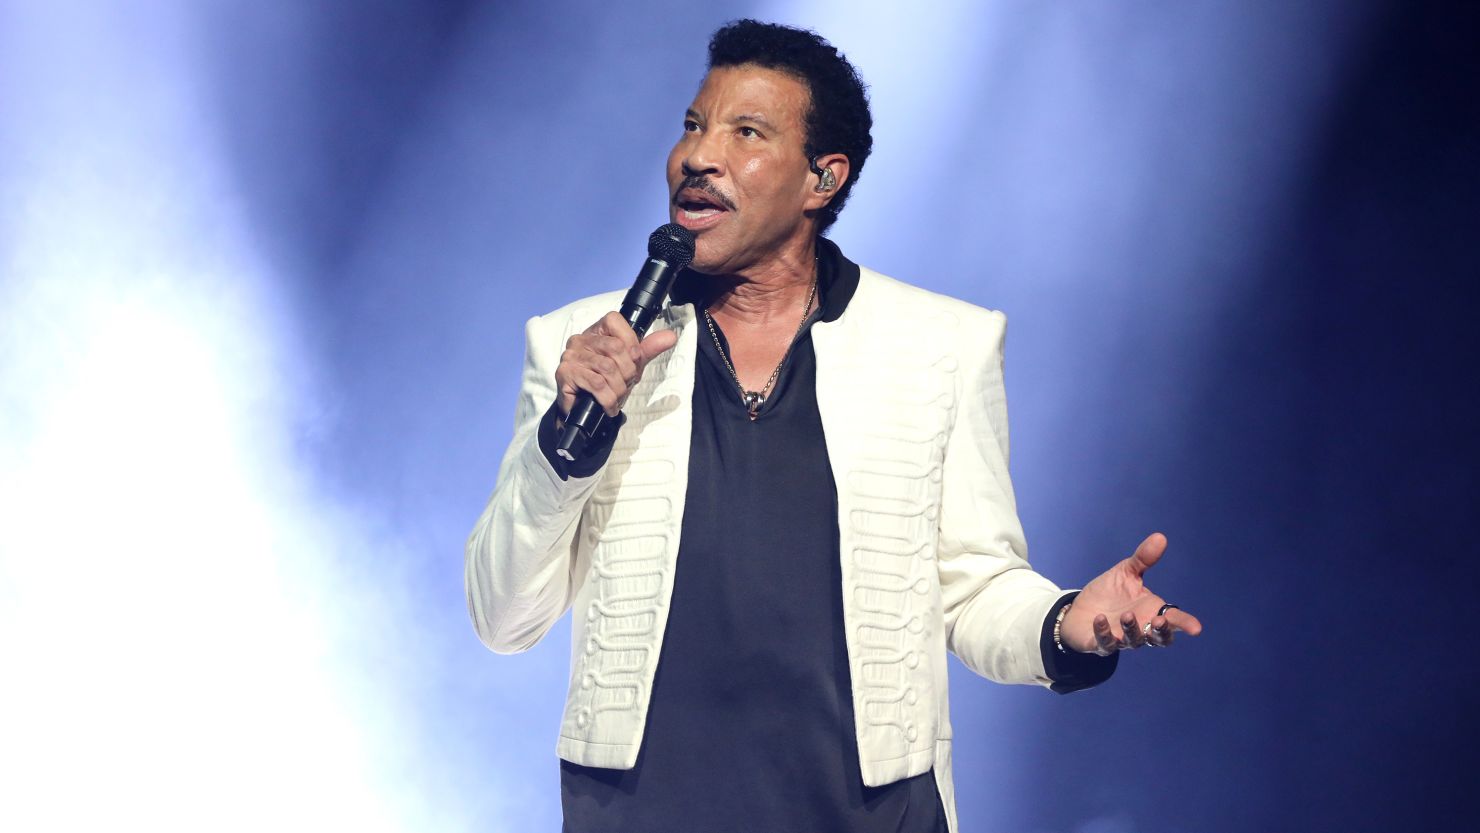 Lionel Richie performs during the "Sing A Song All Night Long" tour on August 8.